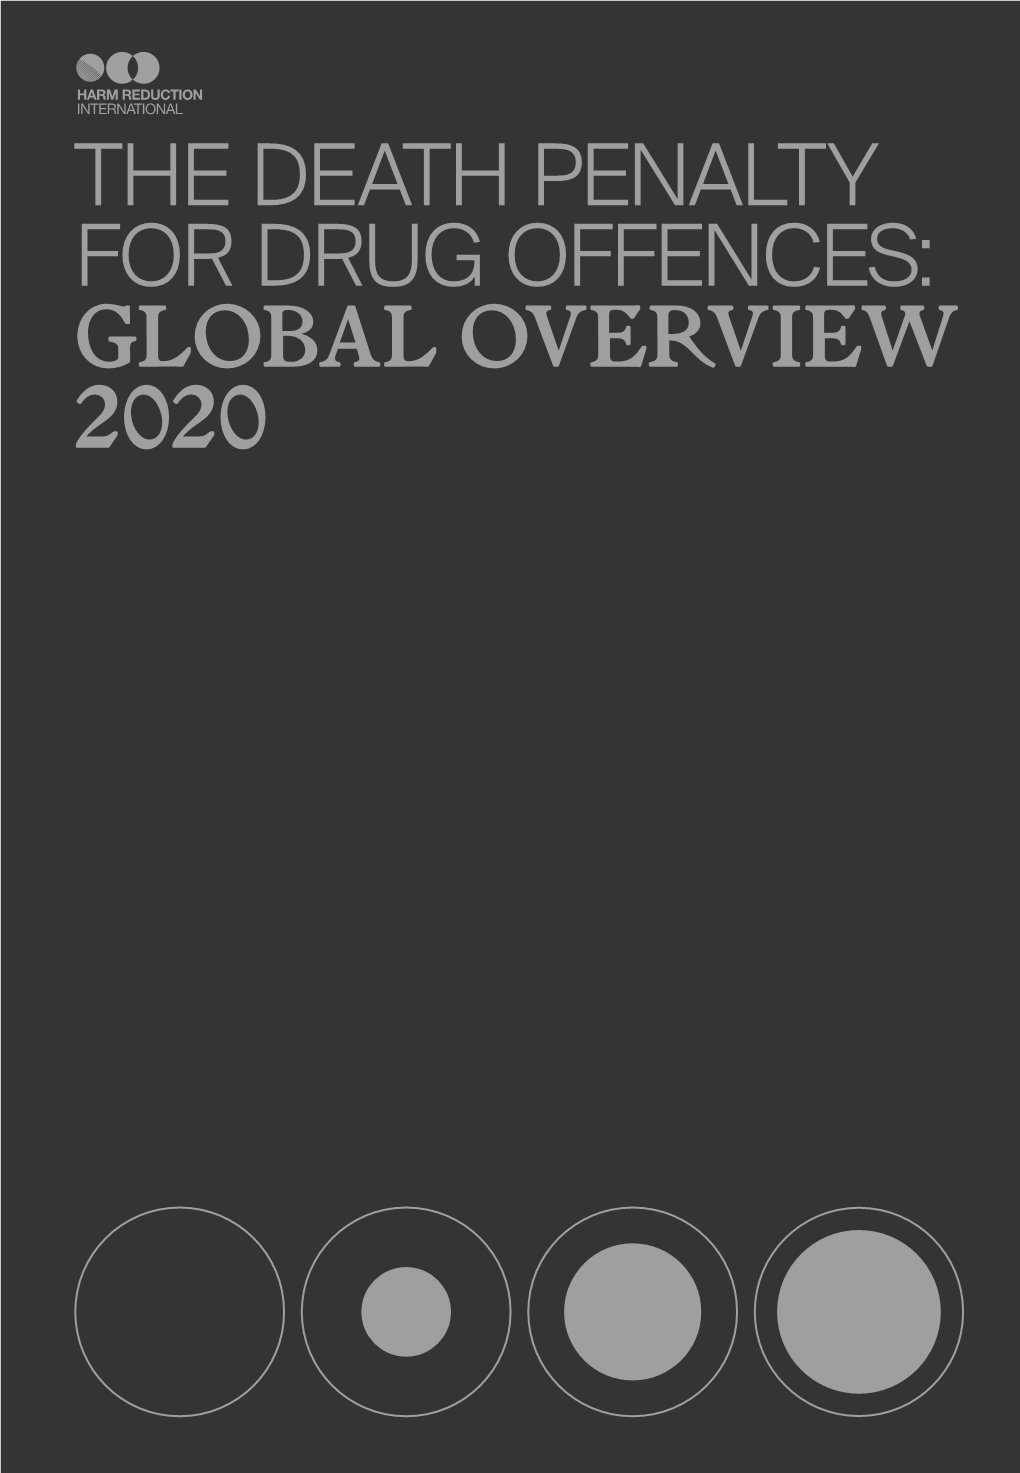 The Death Penalty for Drug Offences: Global Overview 2020